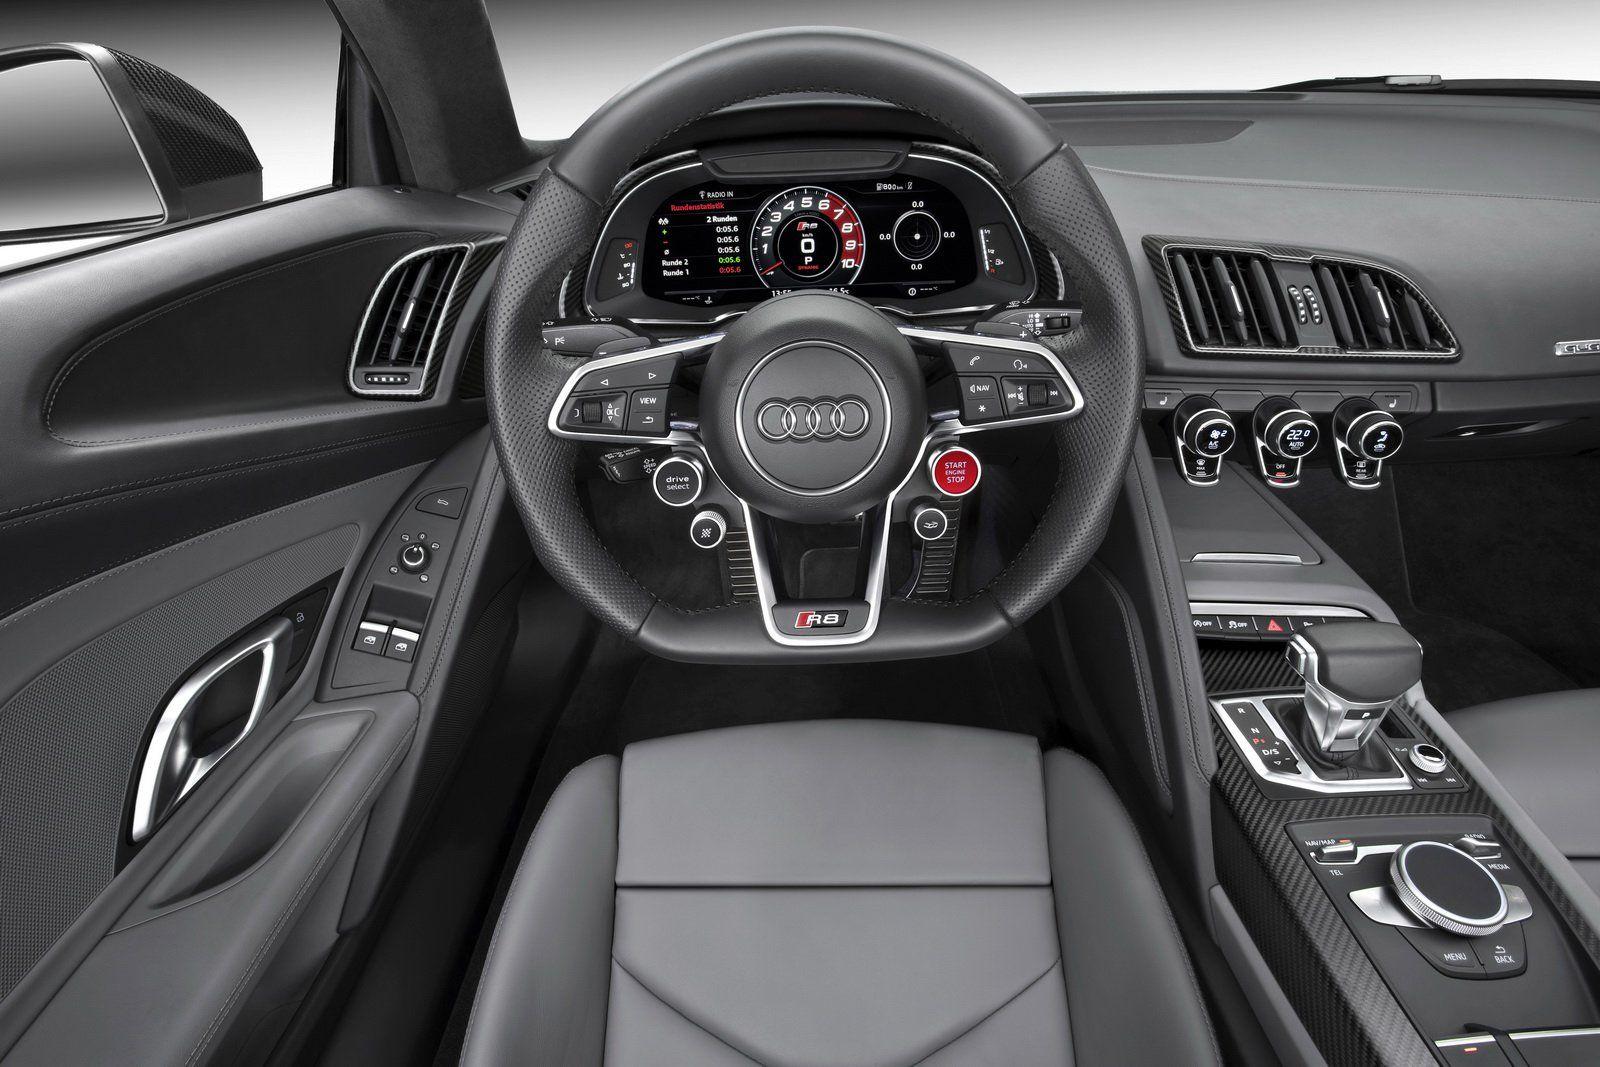 Audi R8 Is Racetrack Ready, But Comfortable Enough